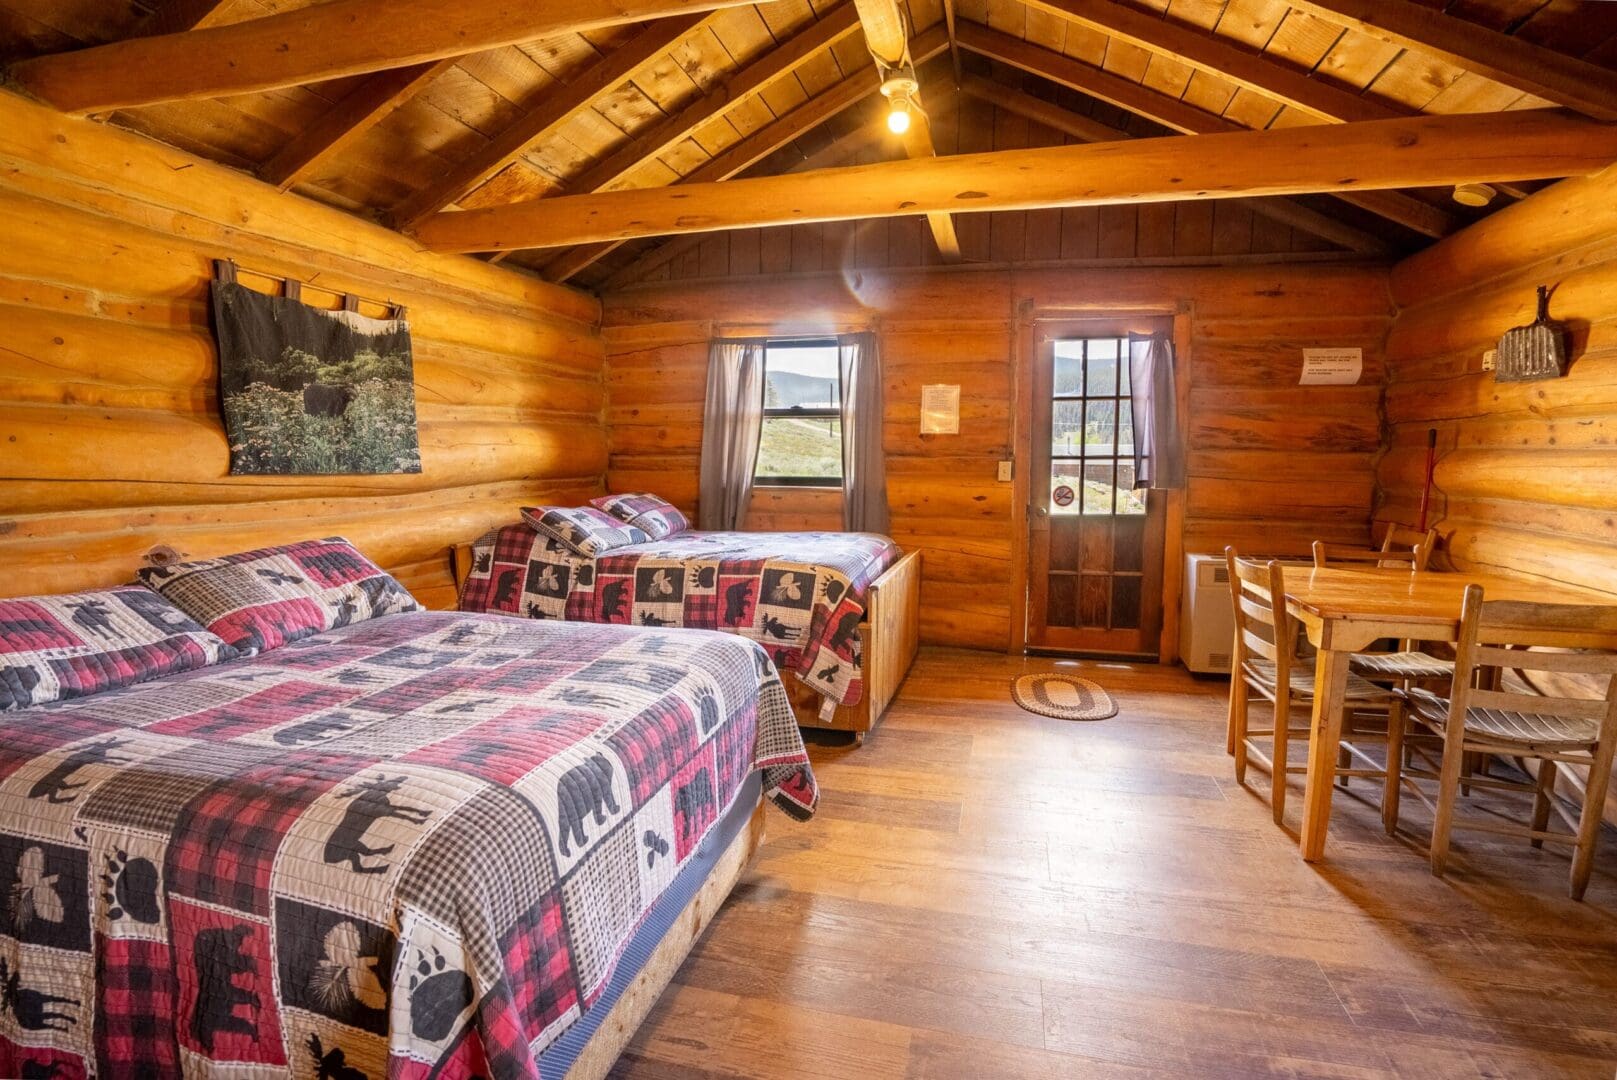 A Fully Wooden Room With Two Double Beds and a Table